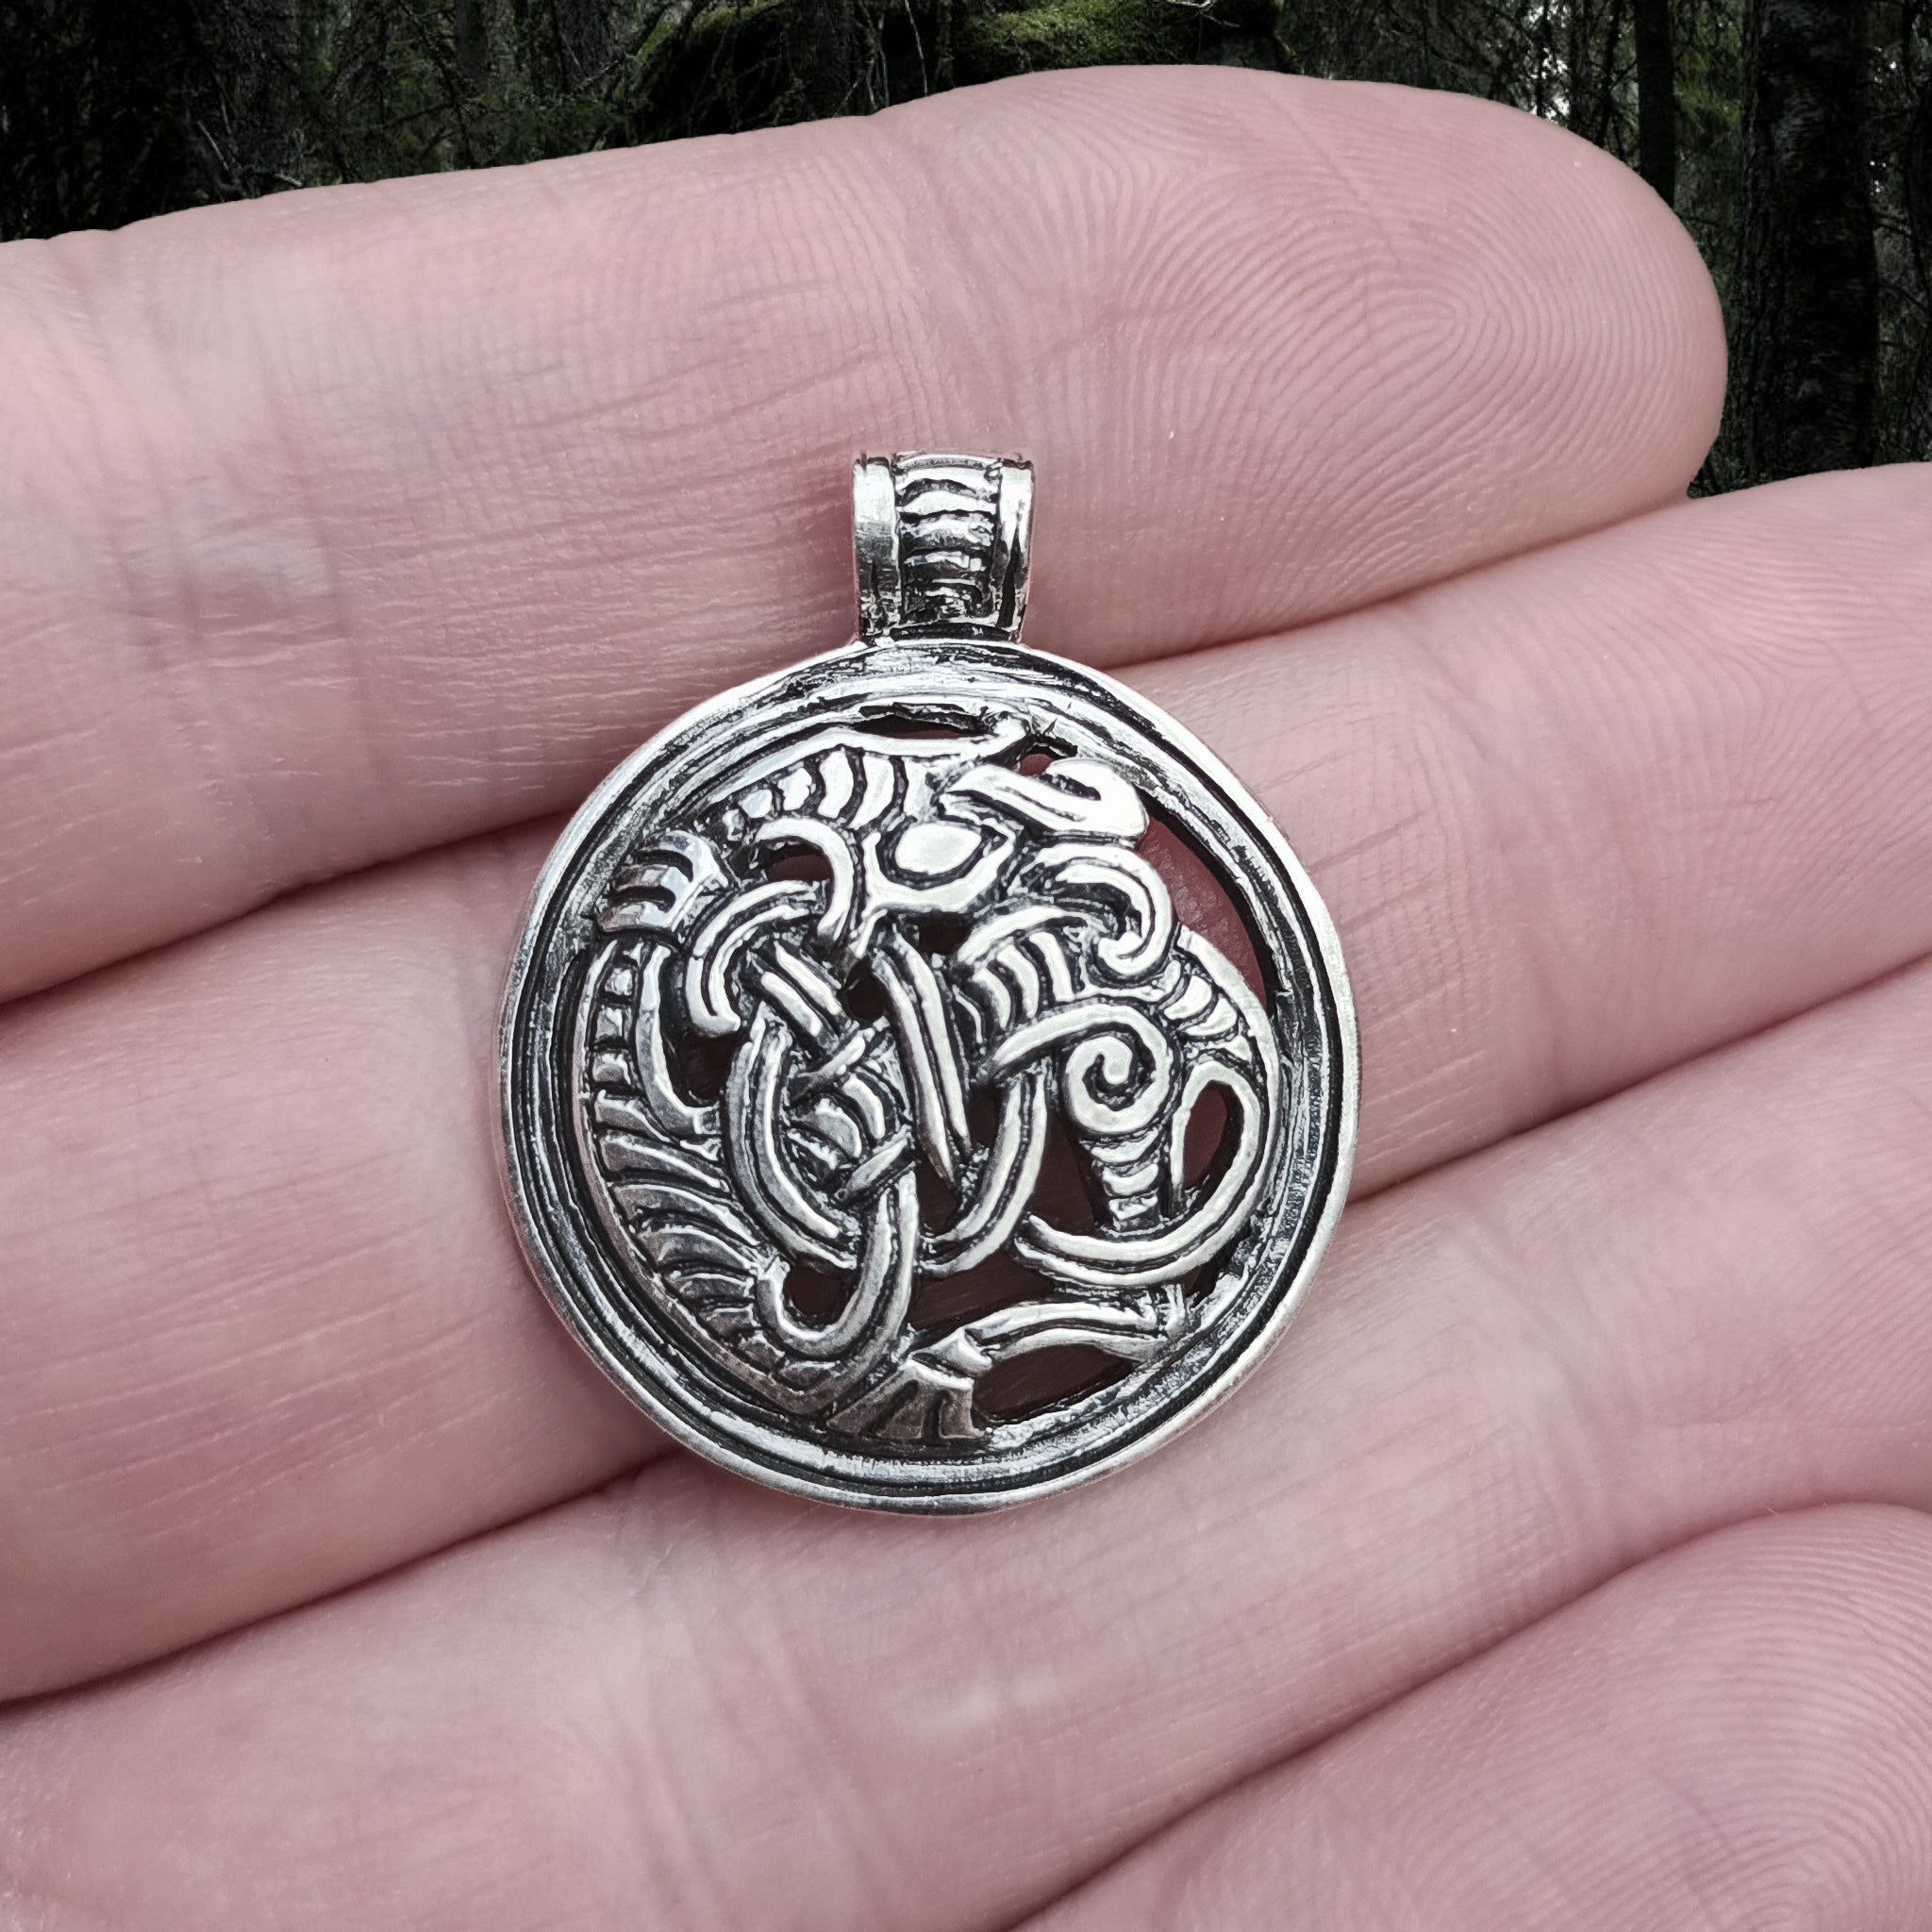 Round Dragon Beast Pendant in Silver on Hand - Viking Jewelry from The Viking Dragon